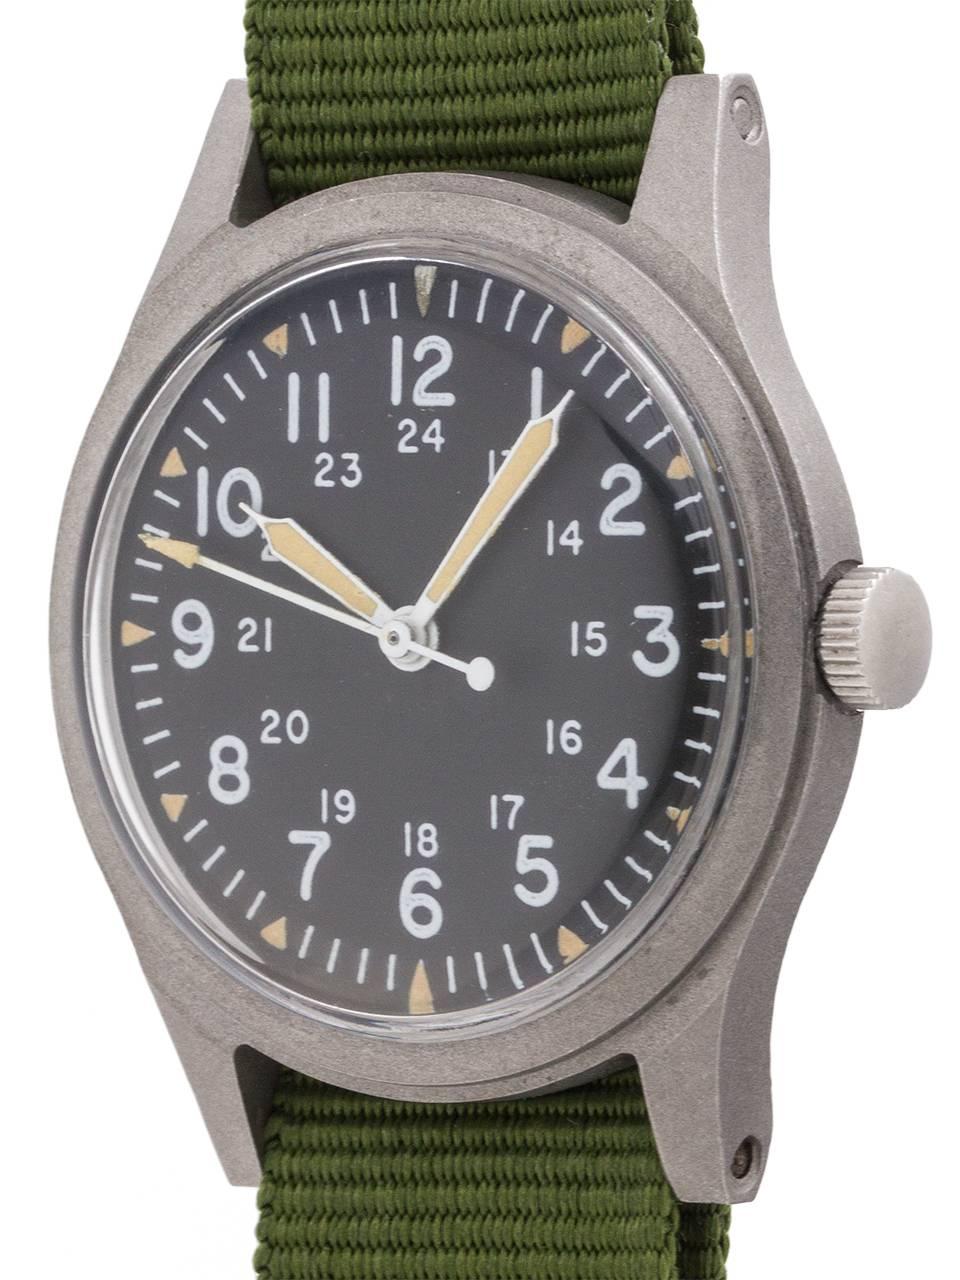 
US Military issue Hamilton man’s wristwatch featuring 34 X 41mm non reflective brushed finish base metal case, acrylic crystal, and original matte black dial with 24 hour indexes and triangular luminous hour indexes, recently re-lumed hands and